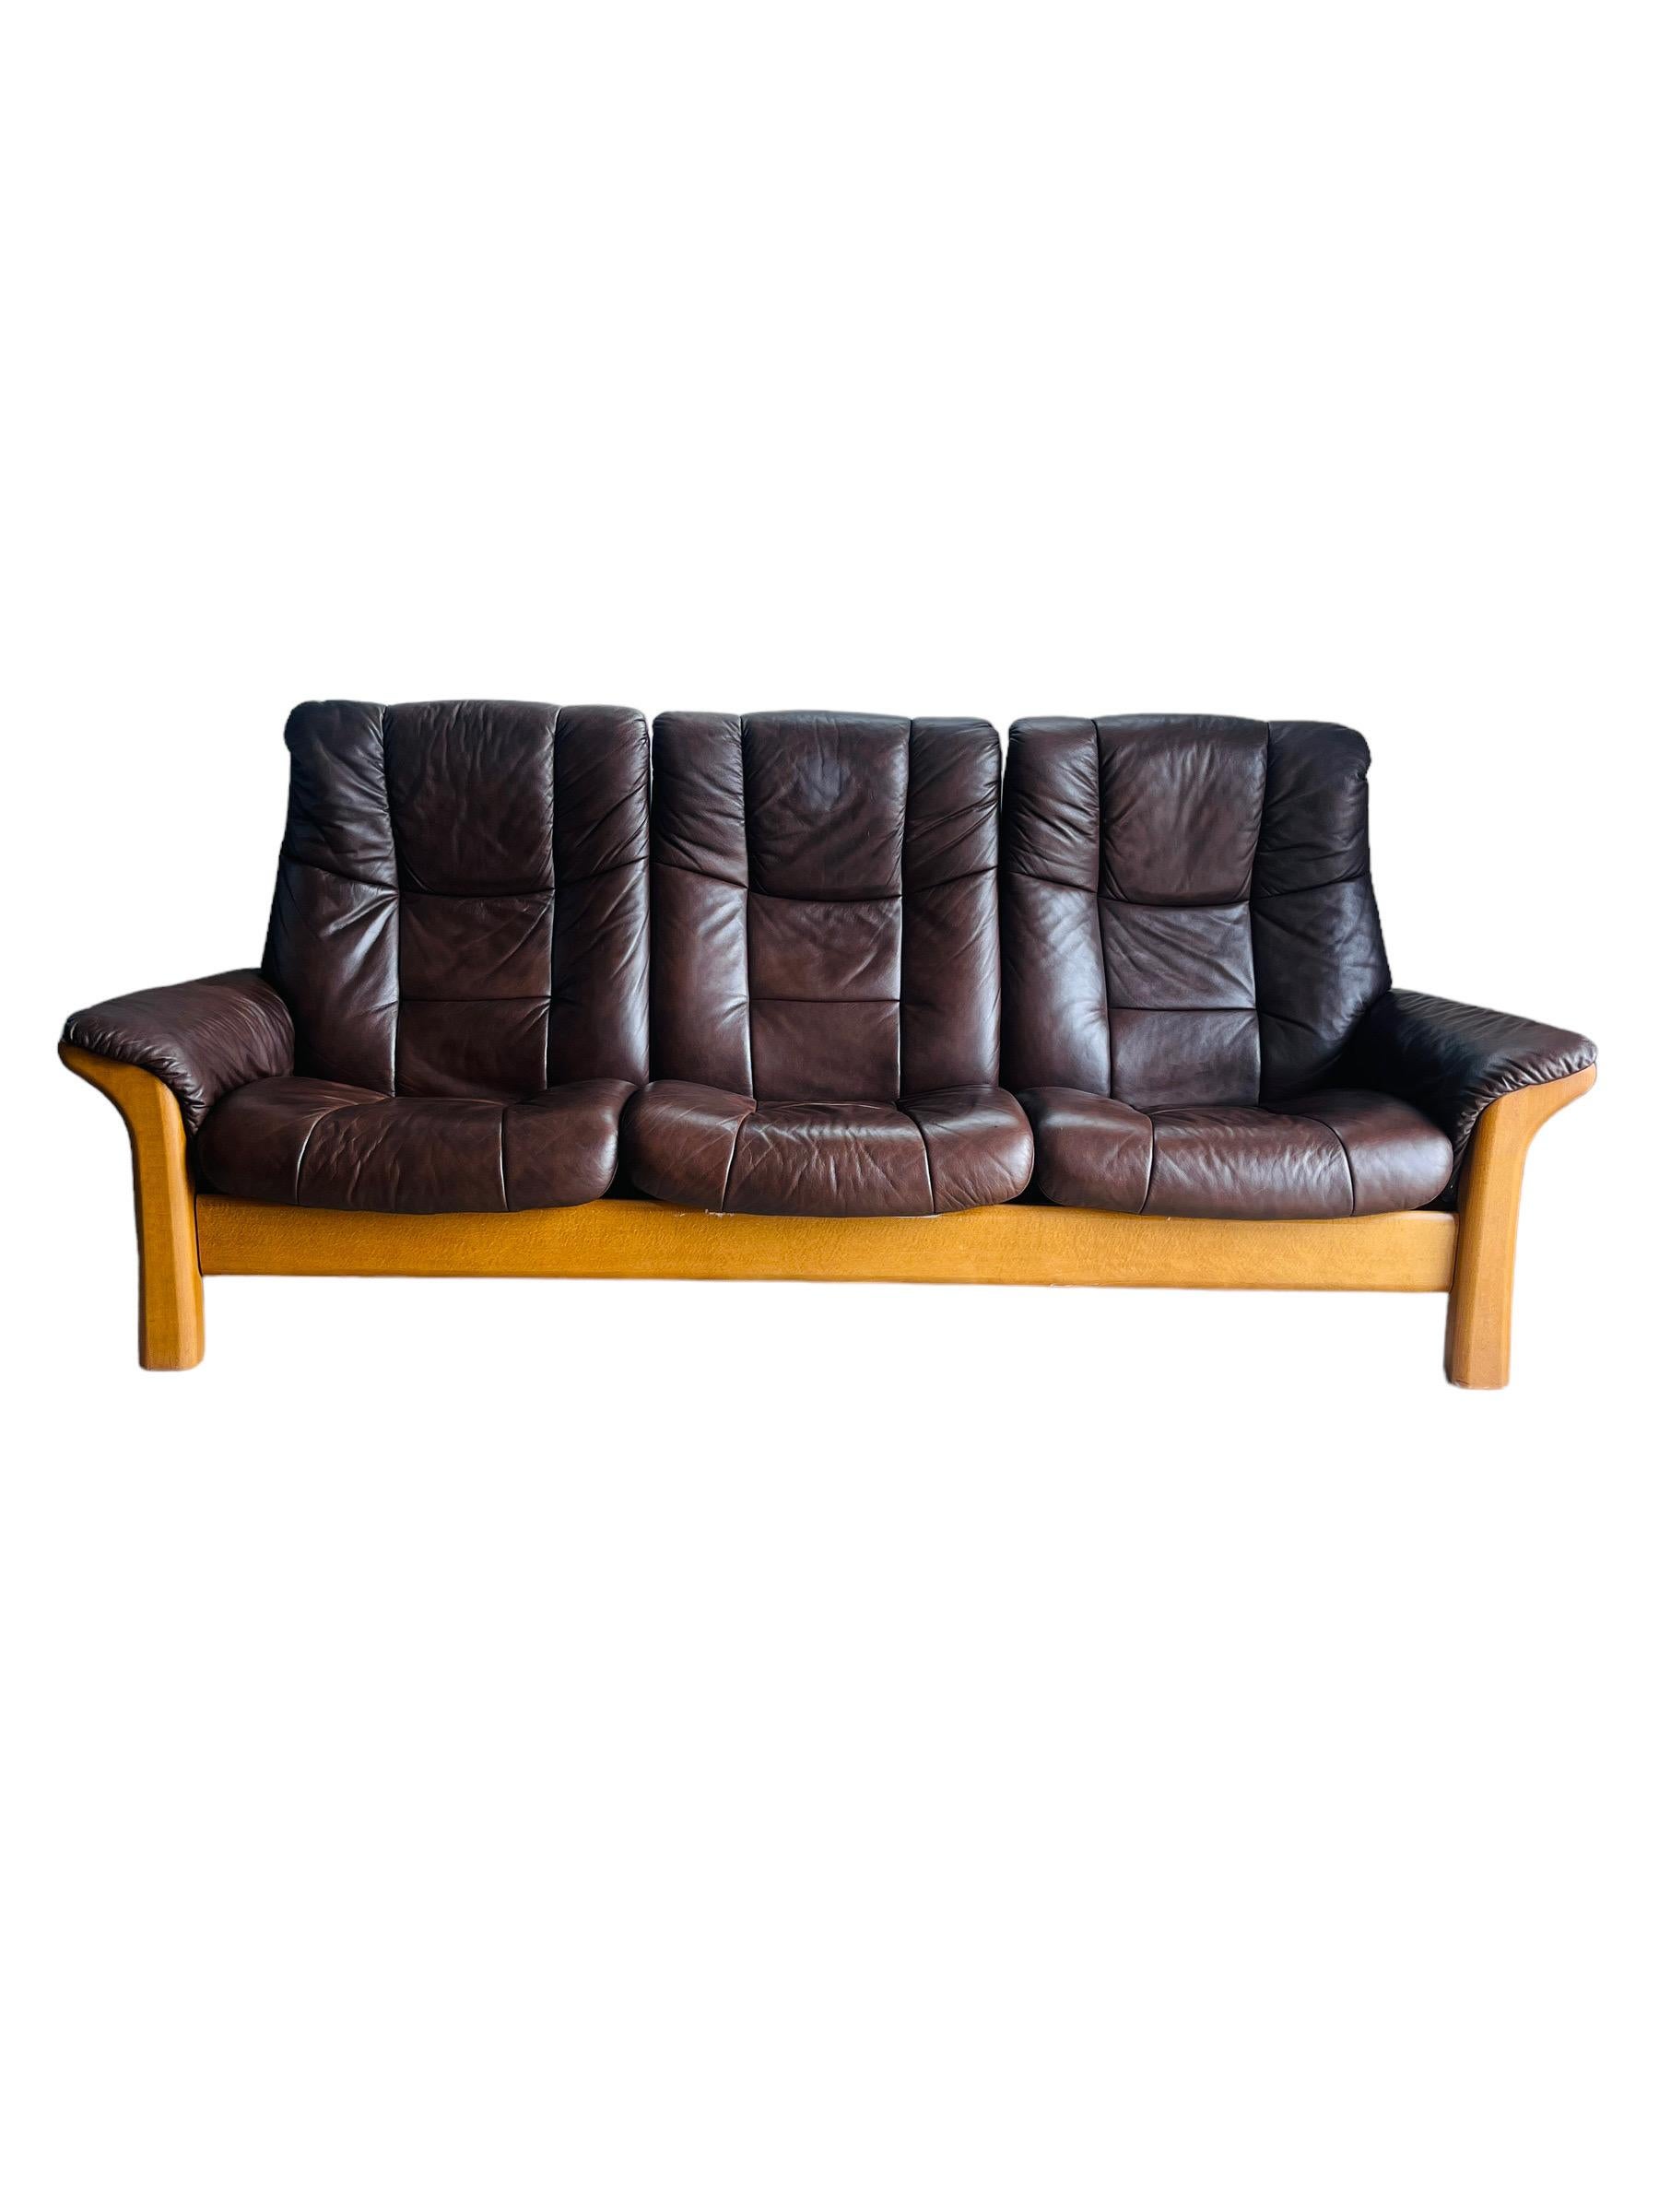 Introducing the Ekornes Stressless Sofa, the epitome of comfort, style, and craftsmanship. With its elegant brown leather upholstery and sturdy solid wood frame, this sofa adds a touch of sophistication to any living space. 

Indulge yourself in